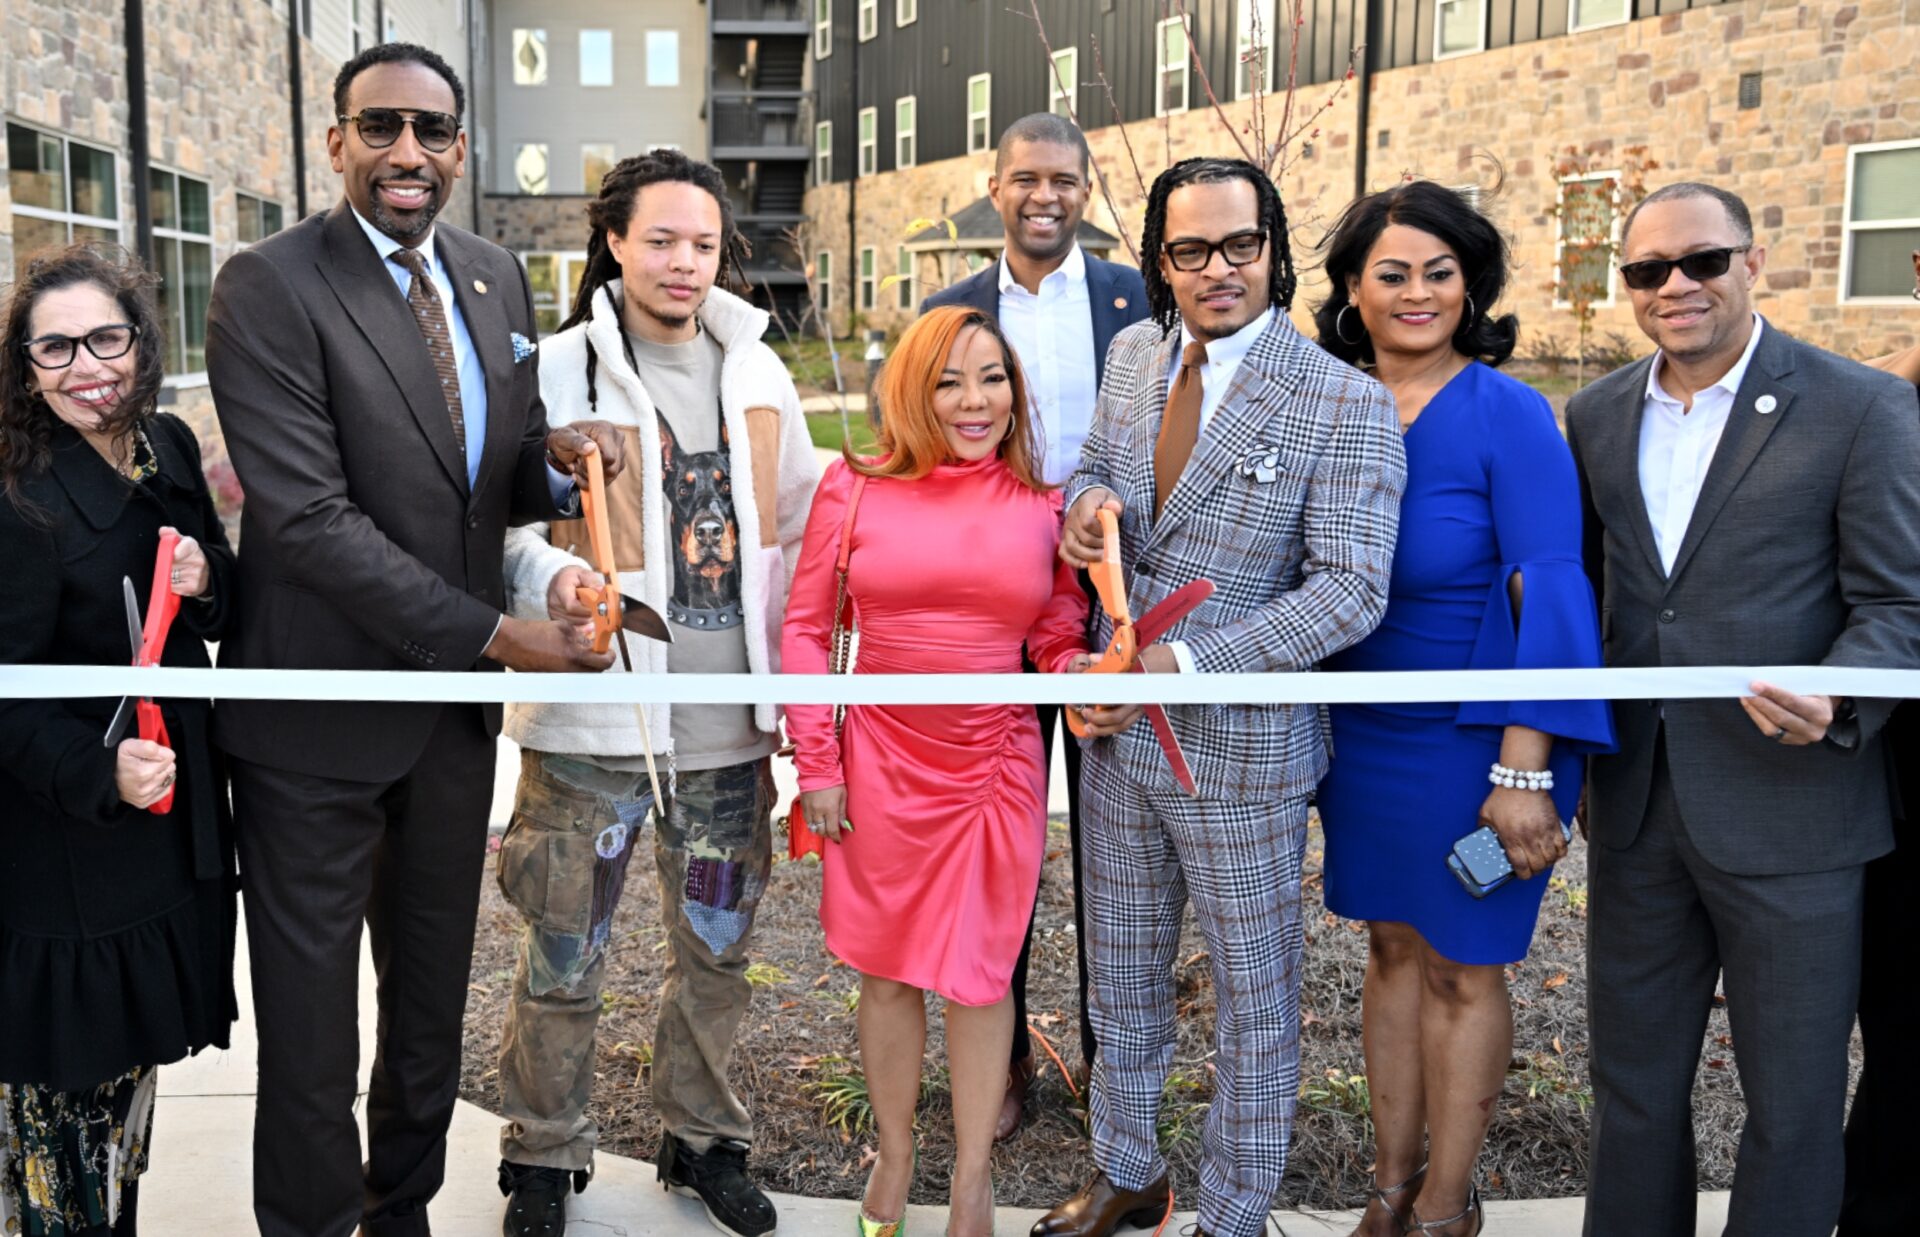 Atlanta Rapper T.I. Appears With Mayor Andre Dickens At Ribbon-Cutting Ceremony For Affordable Housing Development